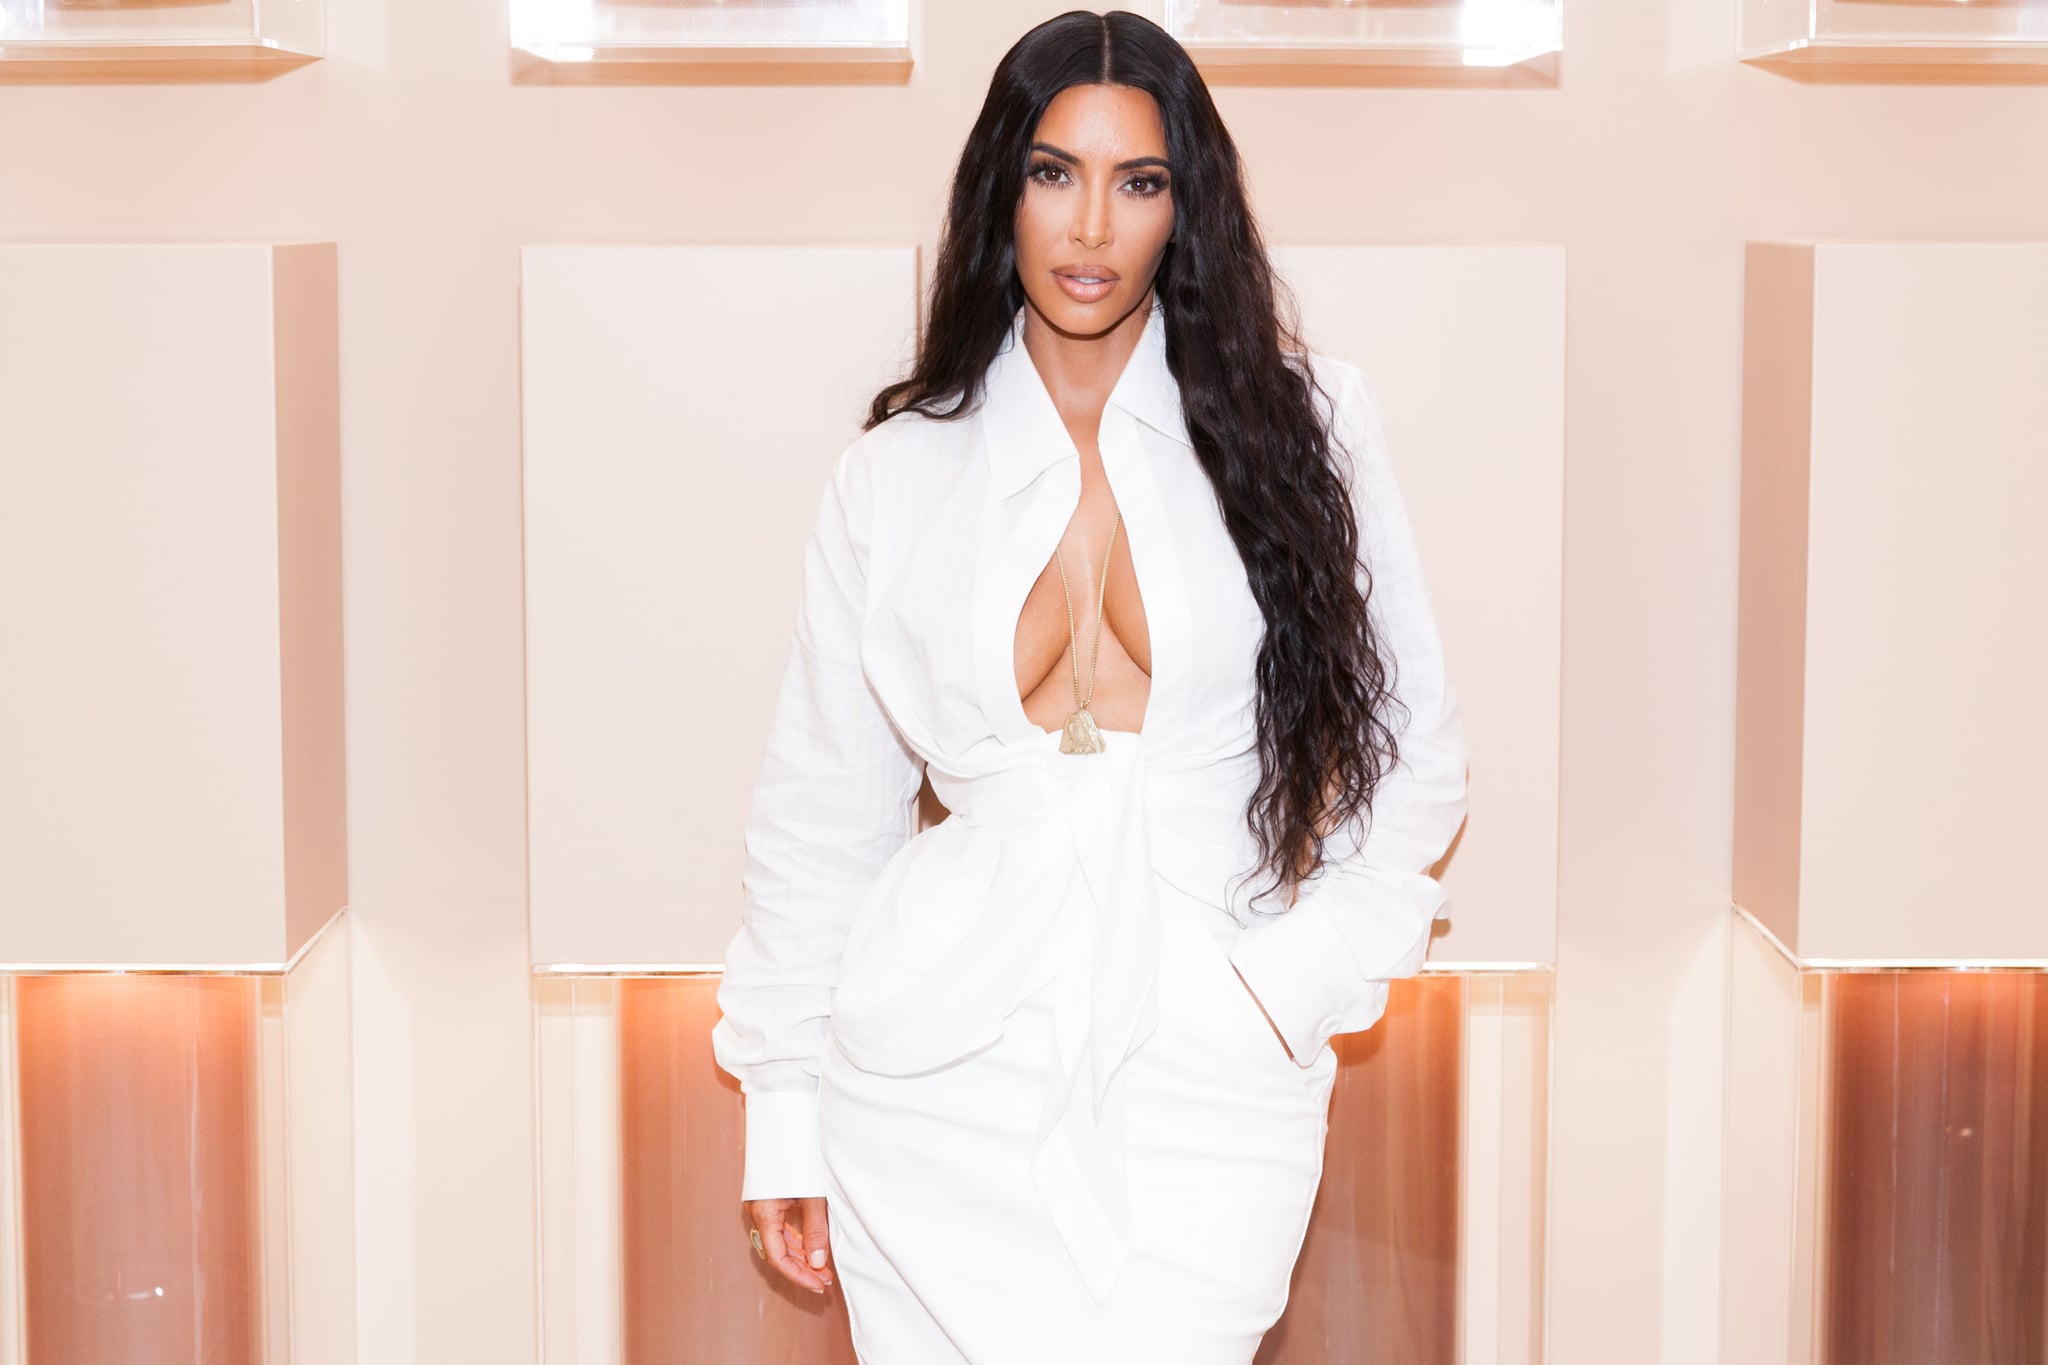 LOS ANGELES, CA - JUNE 18:  Kim Kardashian West at her first-ever KKW Beauty and Fragrance pop-up opening at Westfield Century City in Los Angeles on June 20th, 2018  (Photo by Presley Ann/Getty Images for ABA)